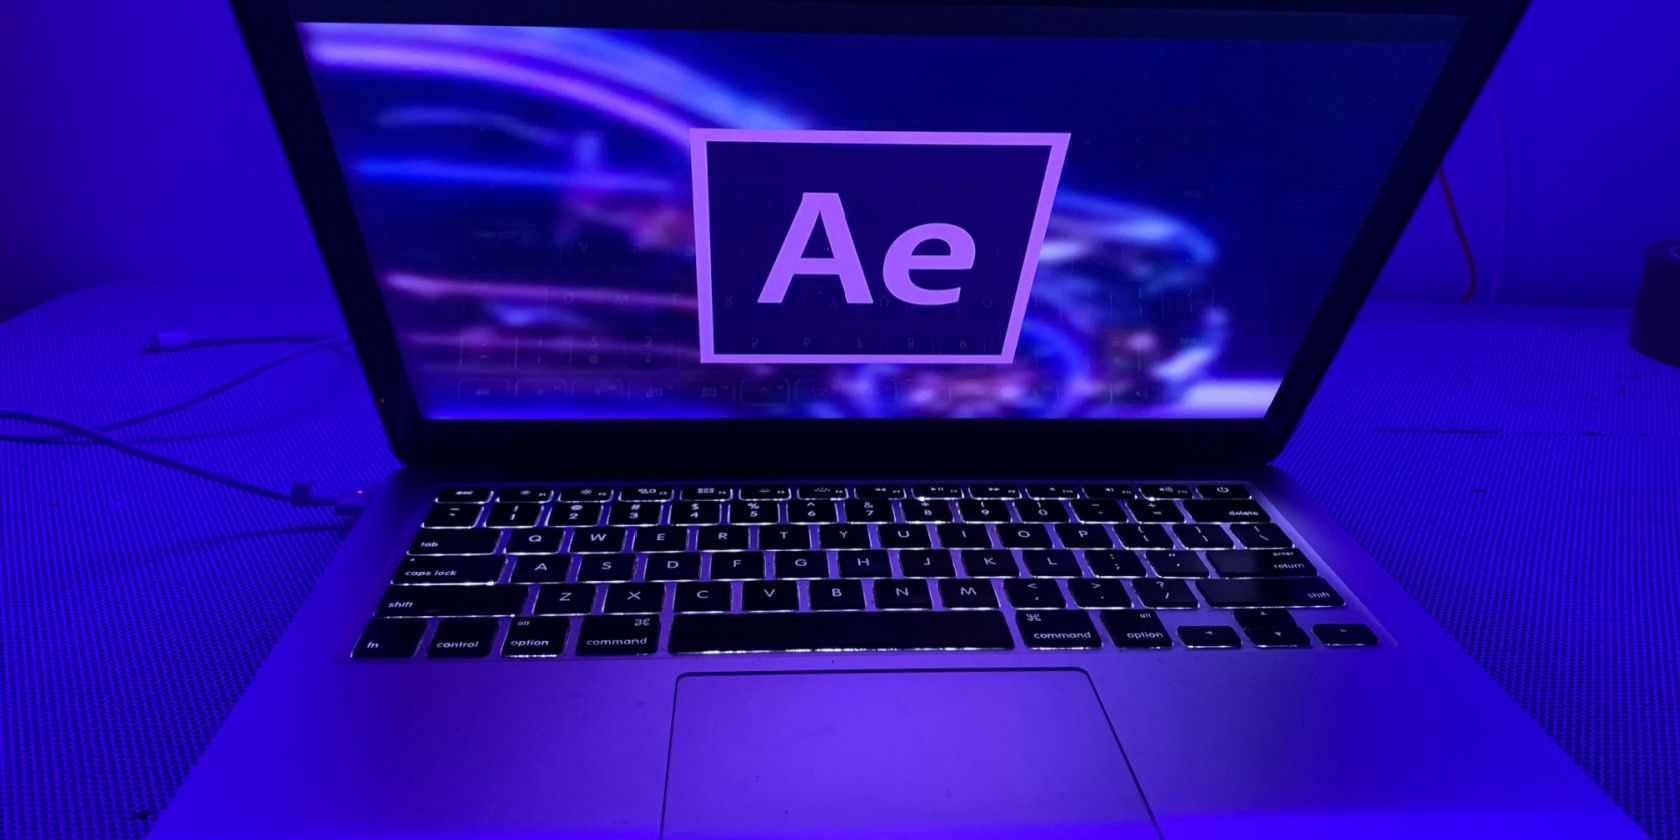 After Effects Logo on Half-Opened MacBook